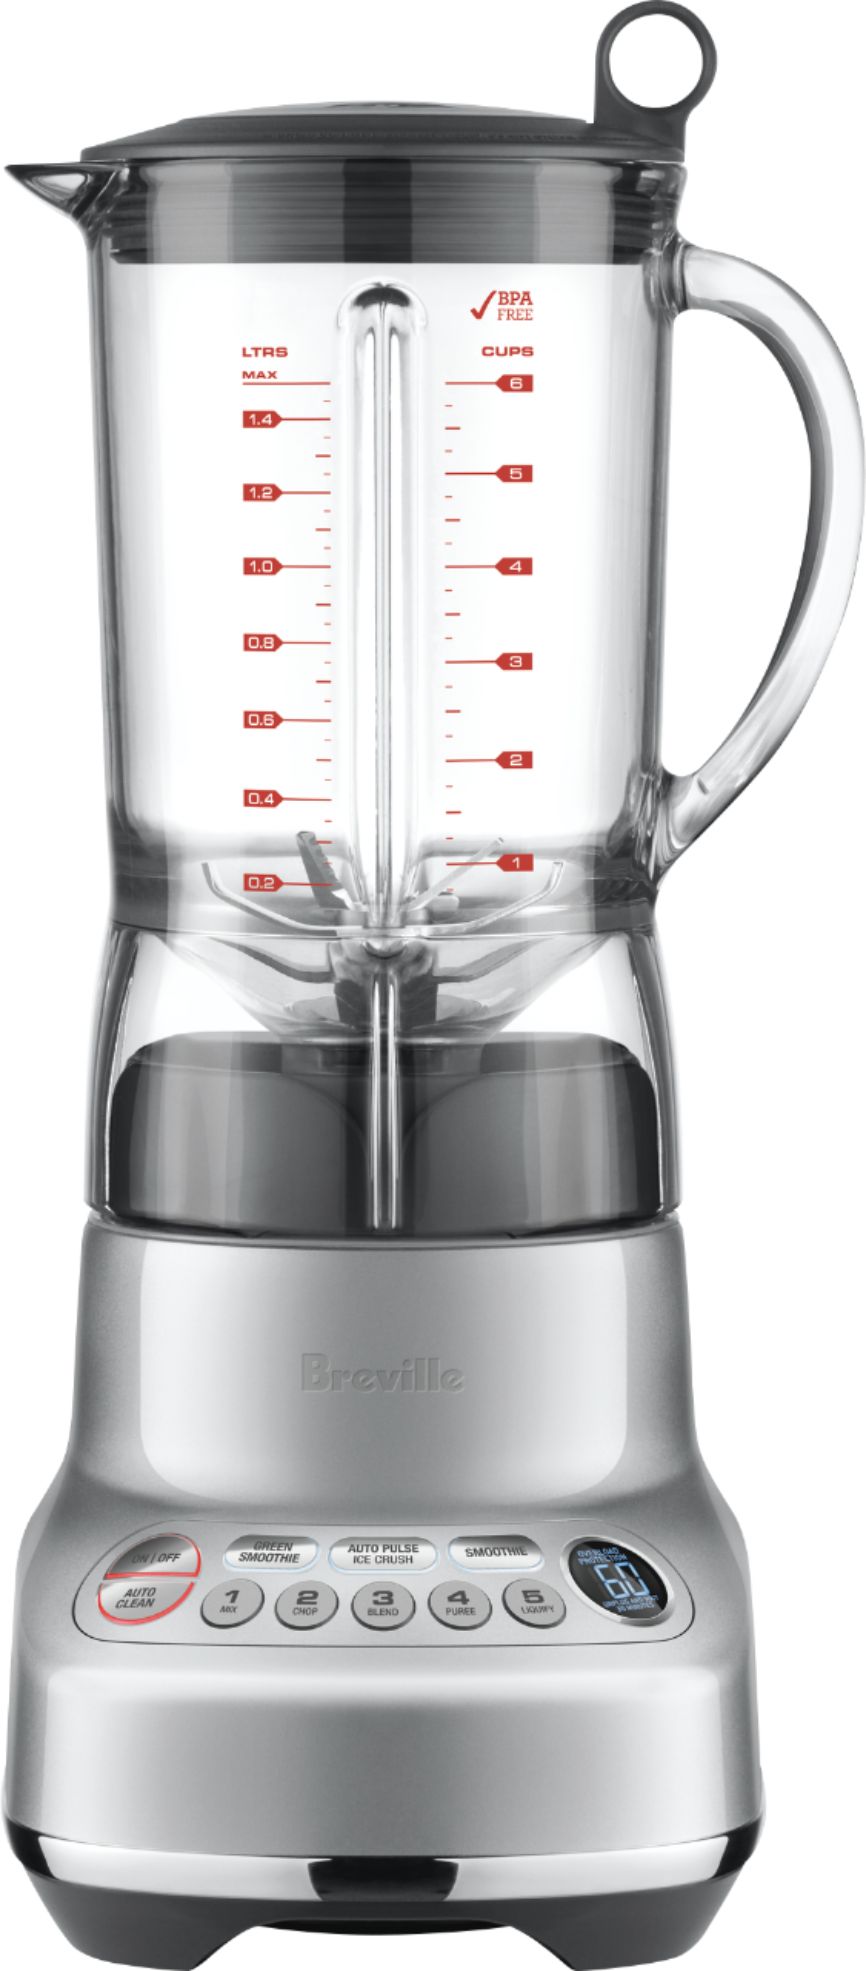 Breville BDF500XL Smart Fryer, Brushed Stainless Steel 15 x 10.5 x 11  inches,Silver